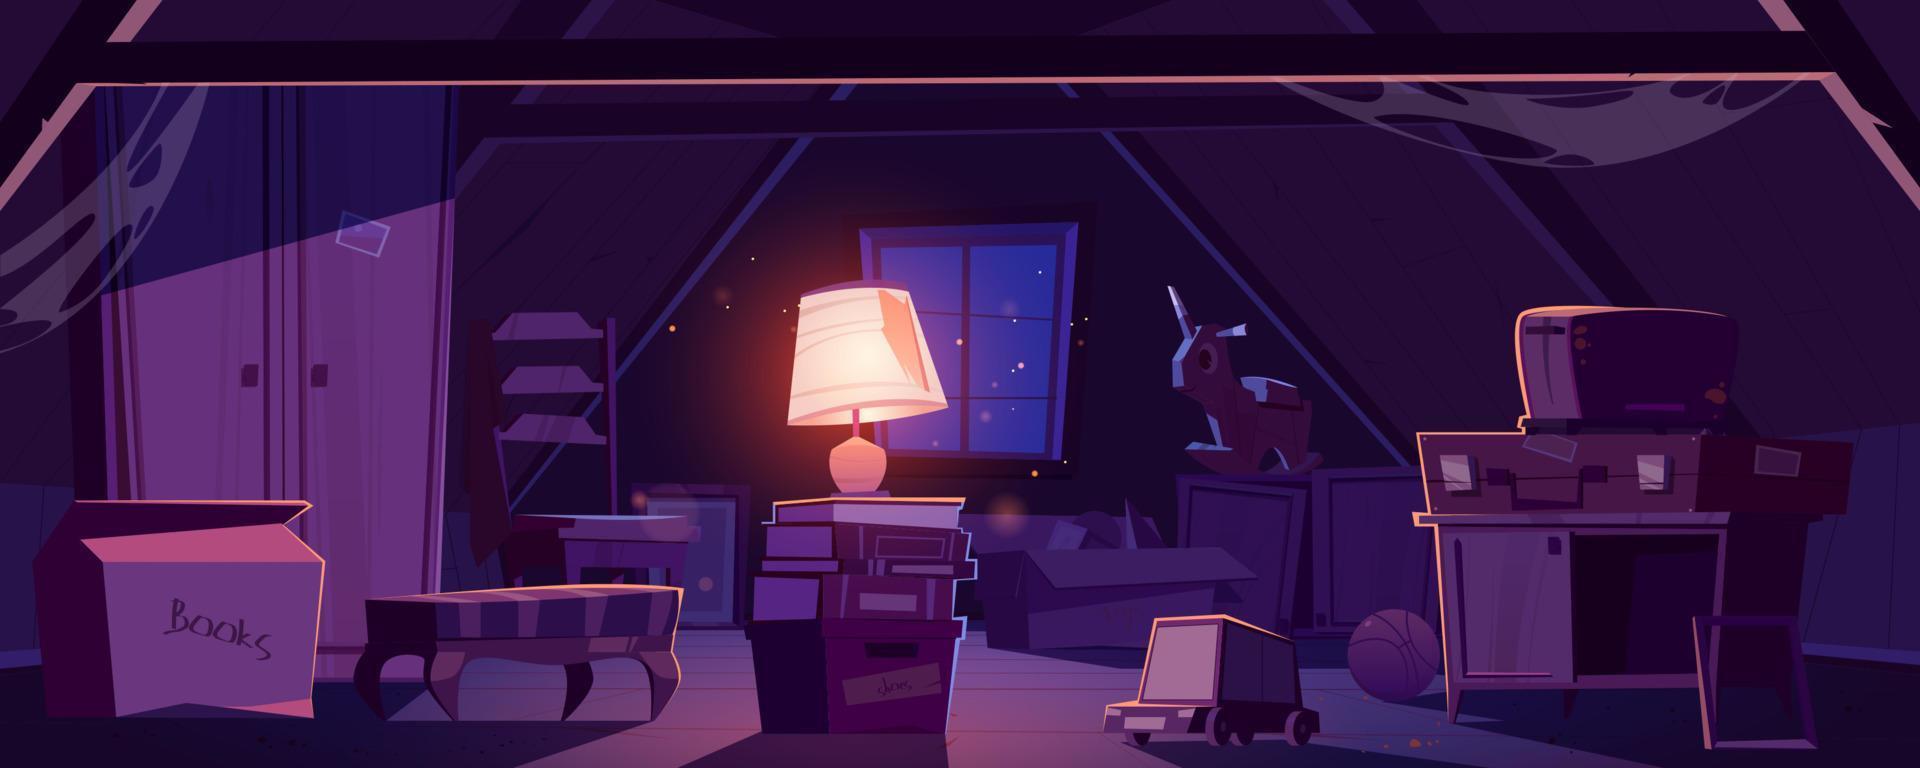 House attic at night with old furniture and lamp vector